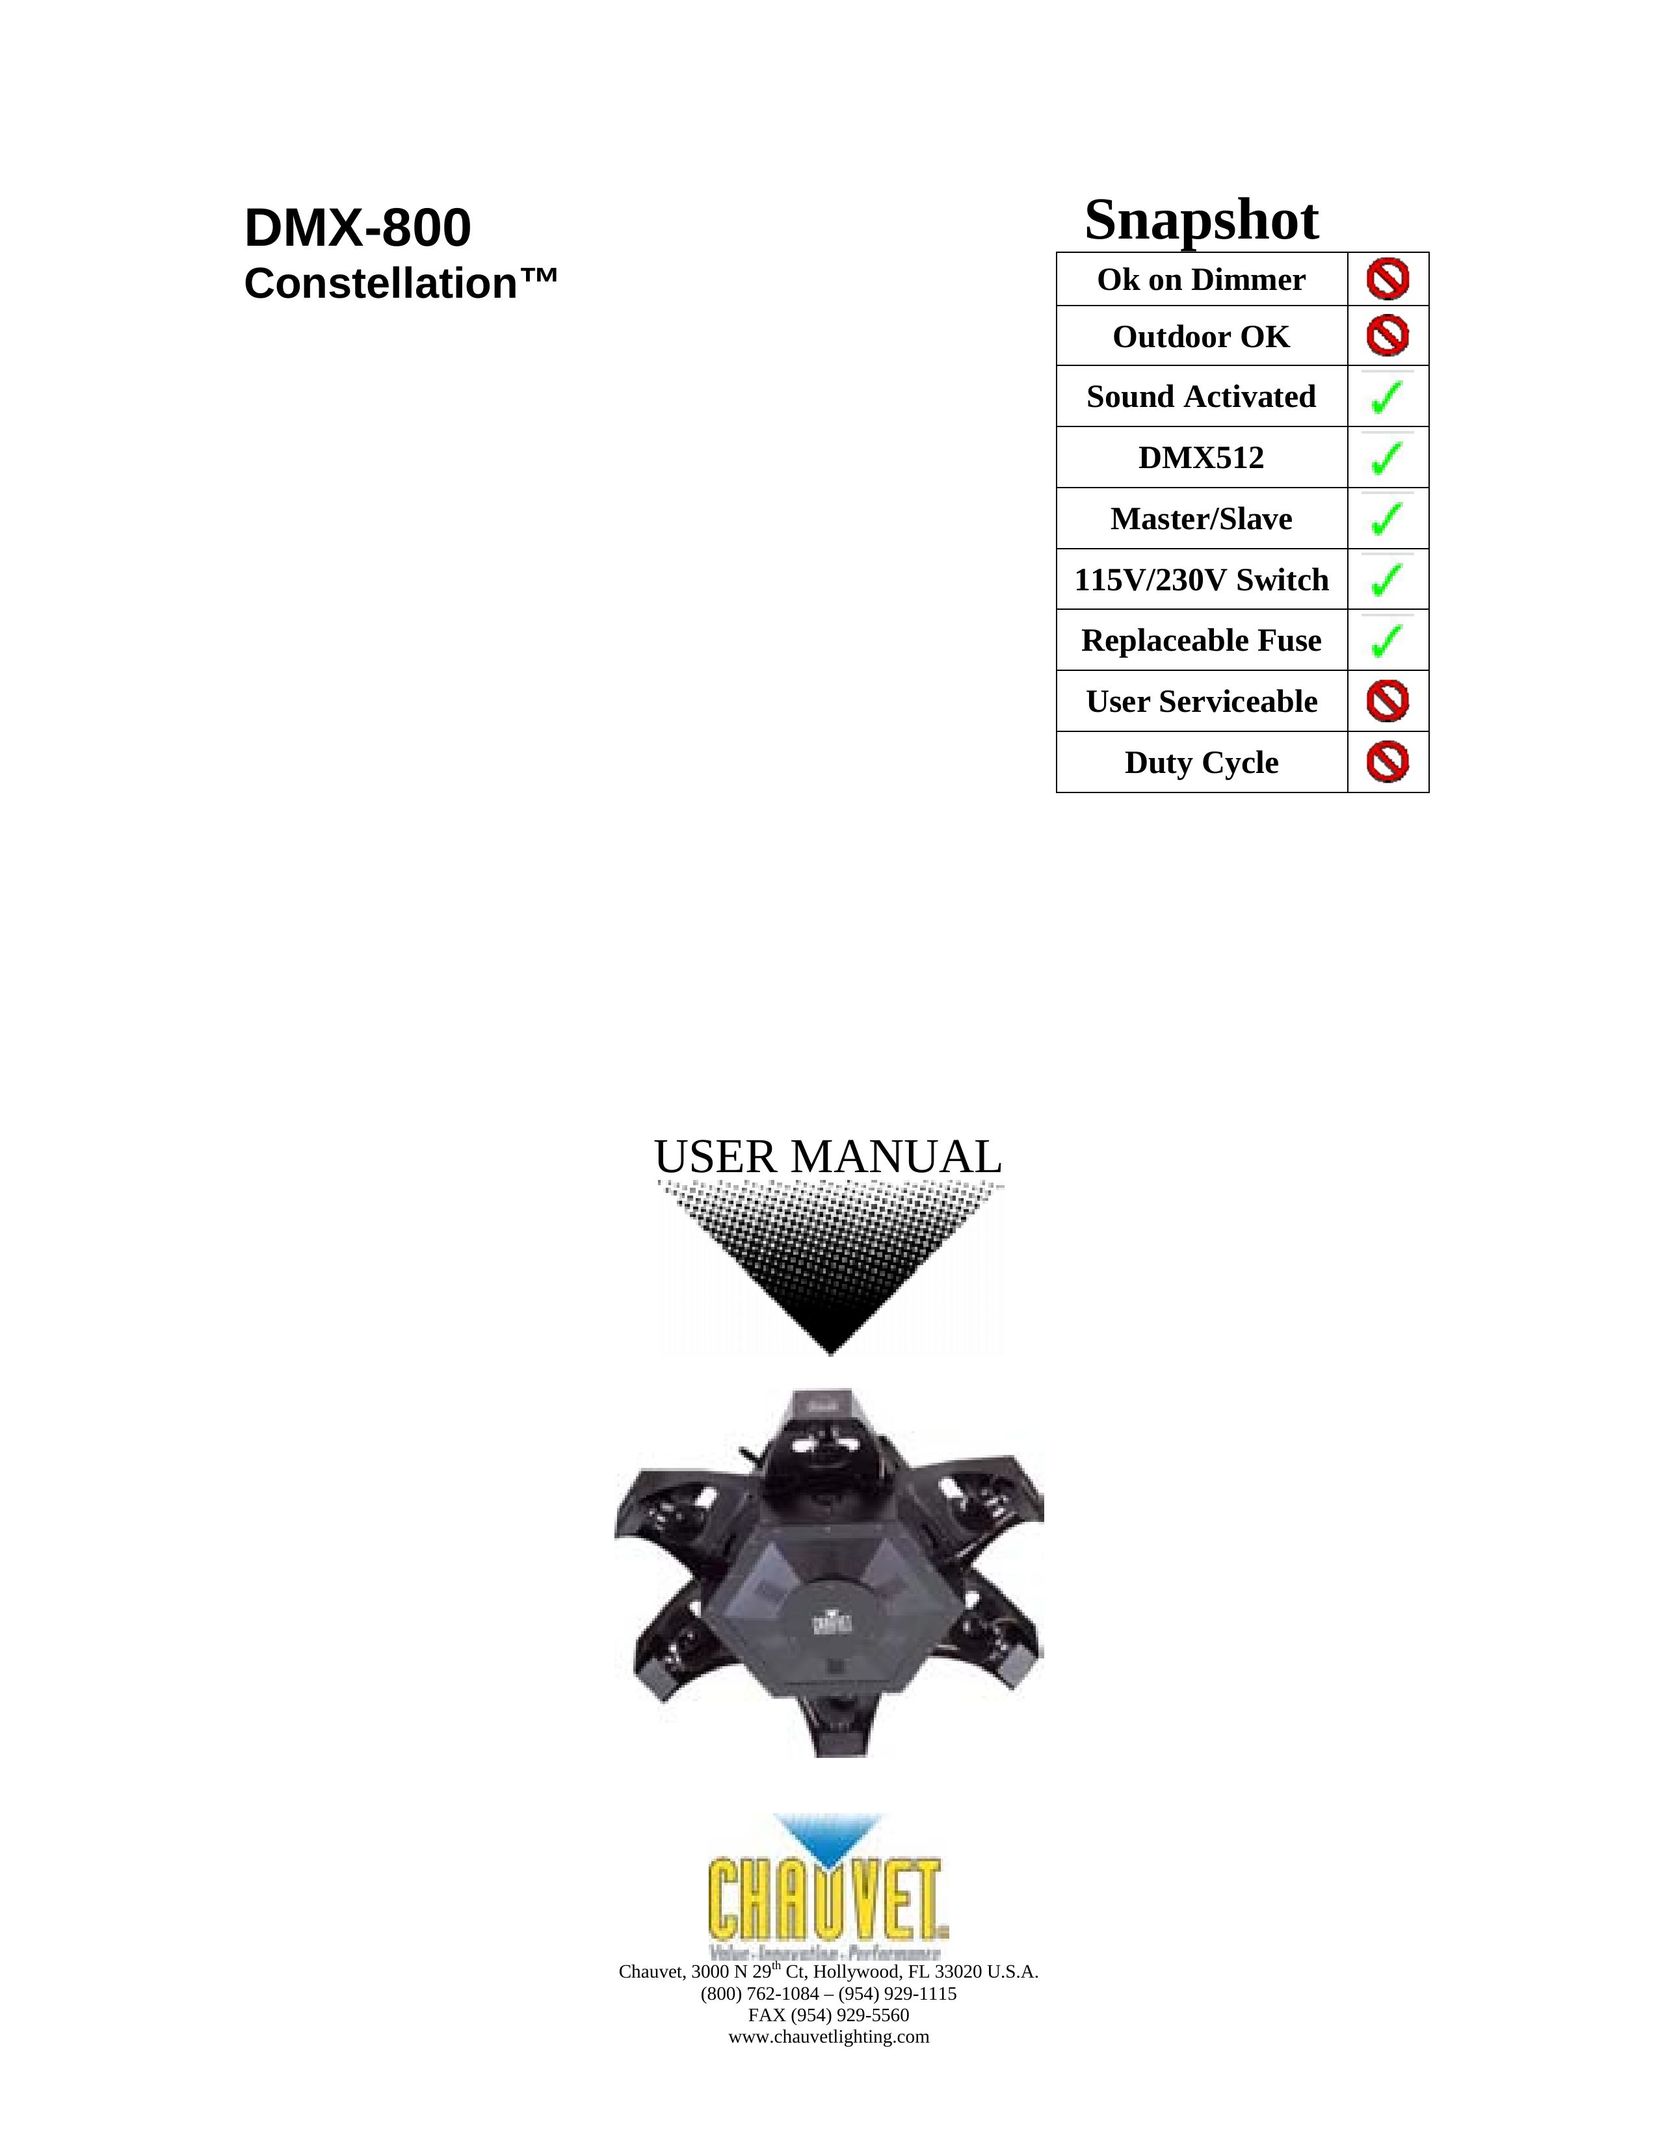 Chauvet DMX-800 All in One Printer User Manual